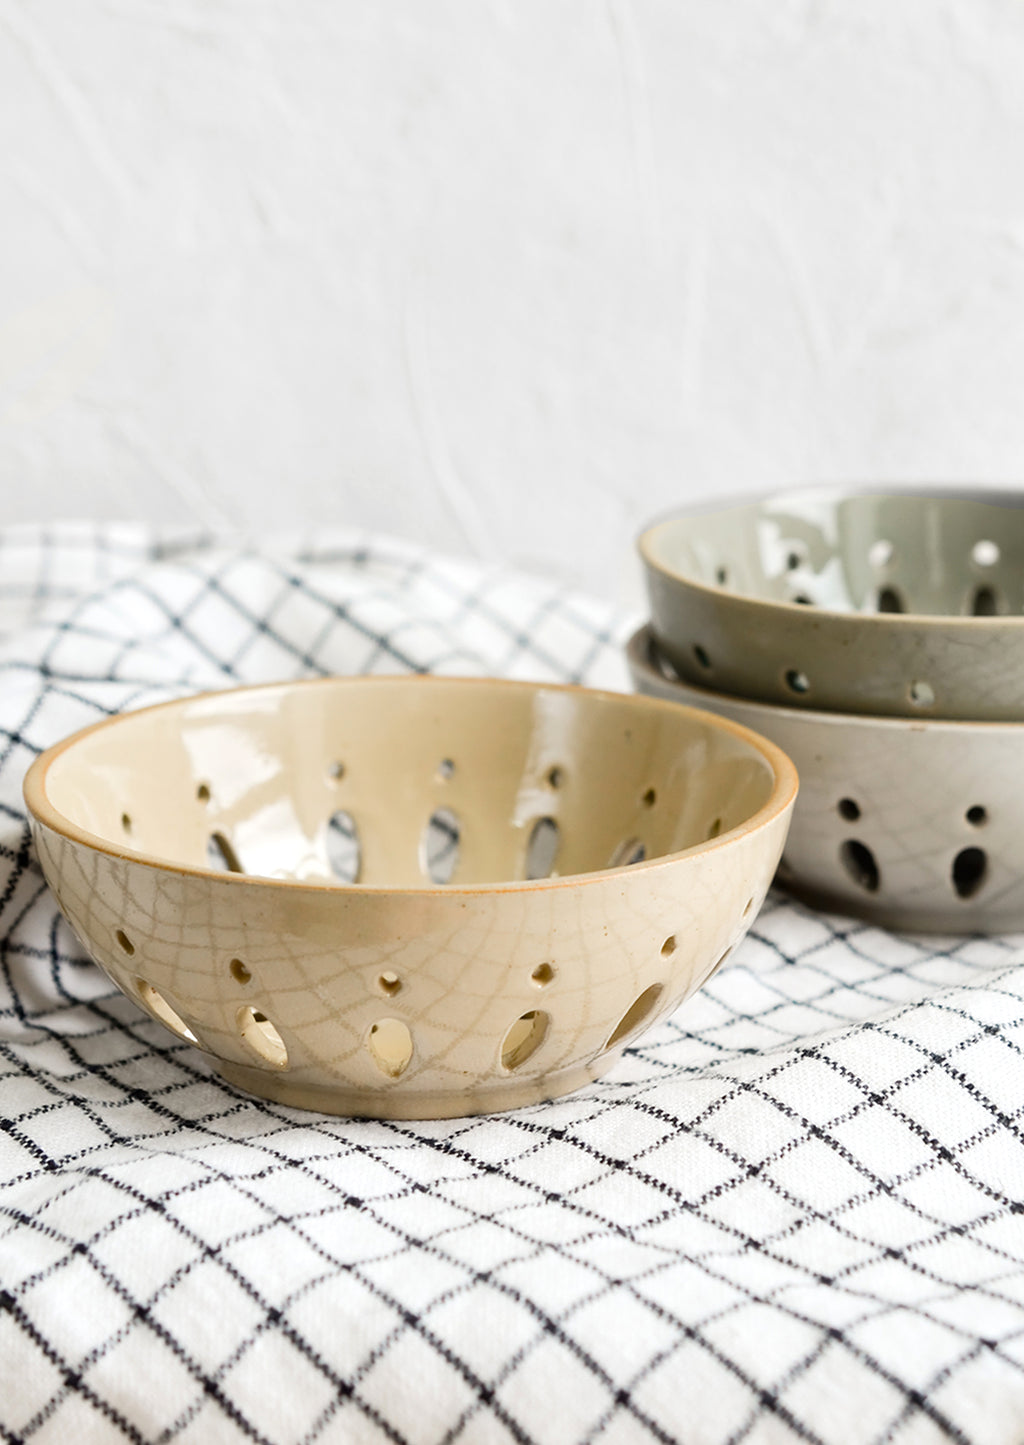 Sand: Ceramic berry bowls in natural colors.